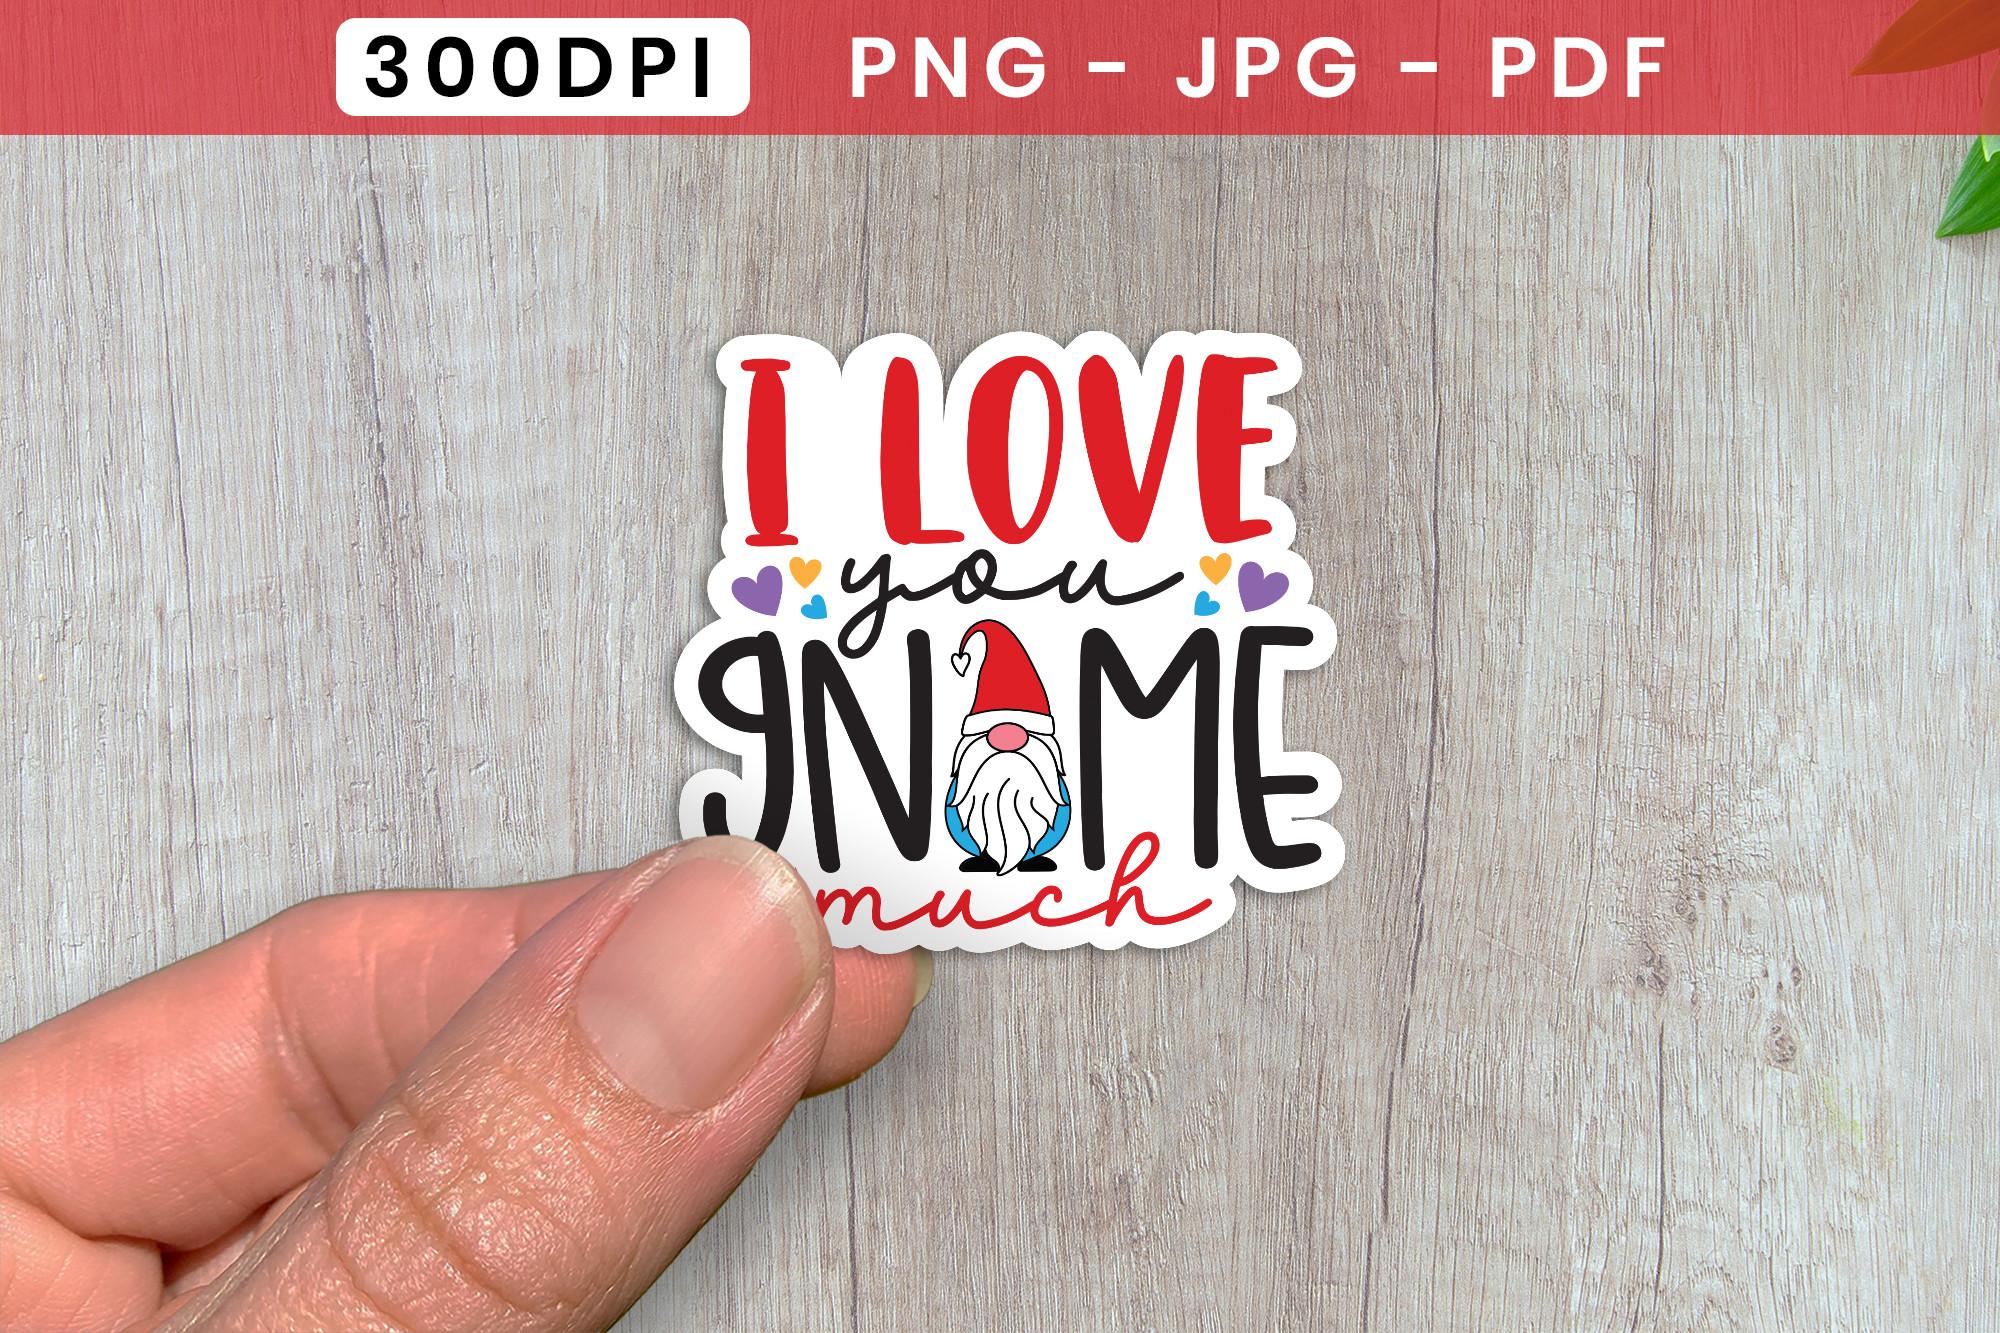 I Love You Gnome Much PNG, Sticker PNG